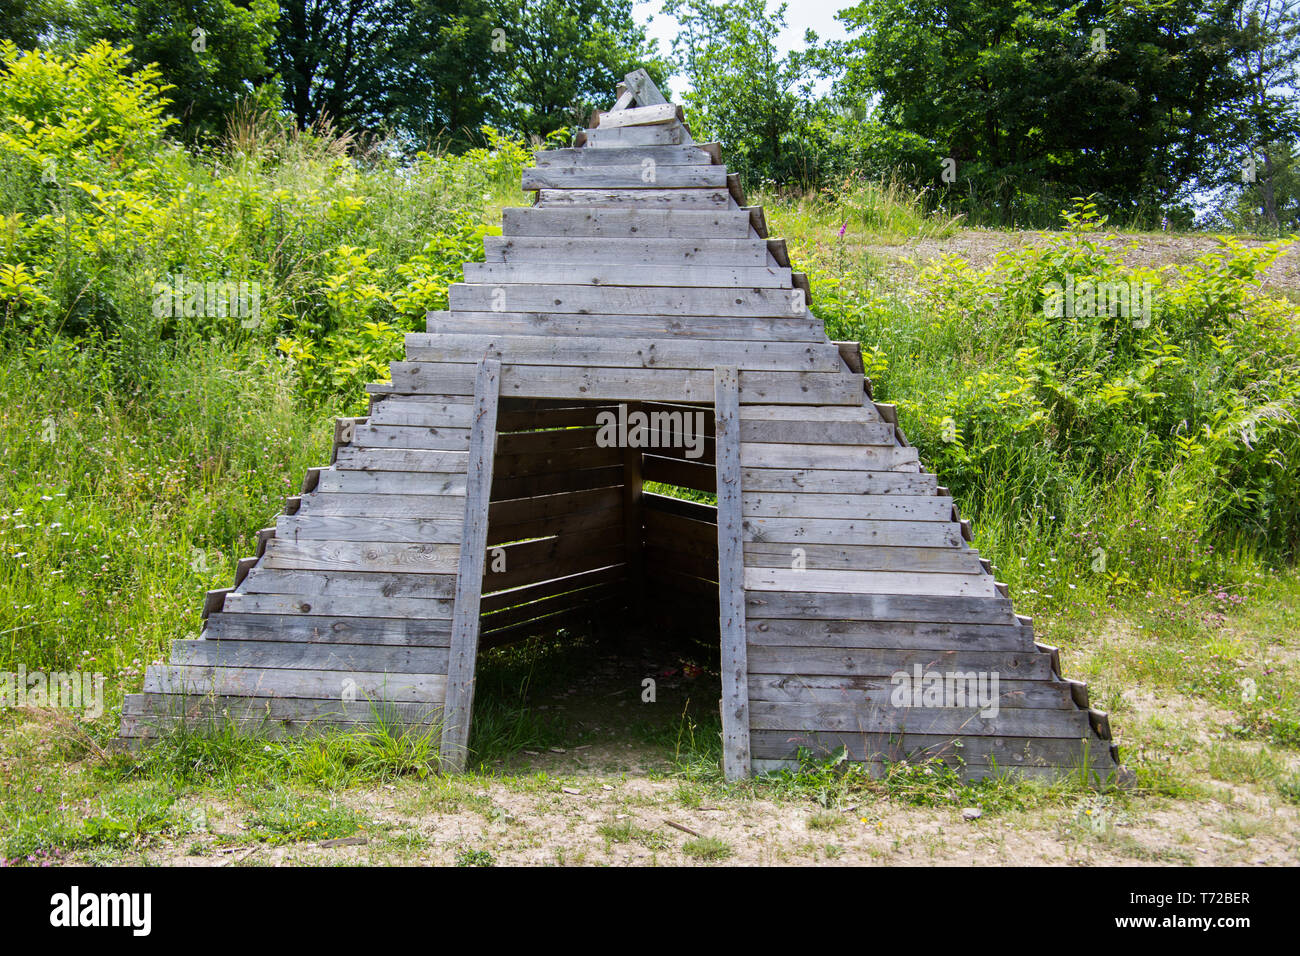 Planks pyramid at the forest edge Stock Photo